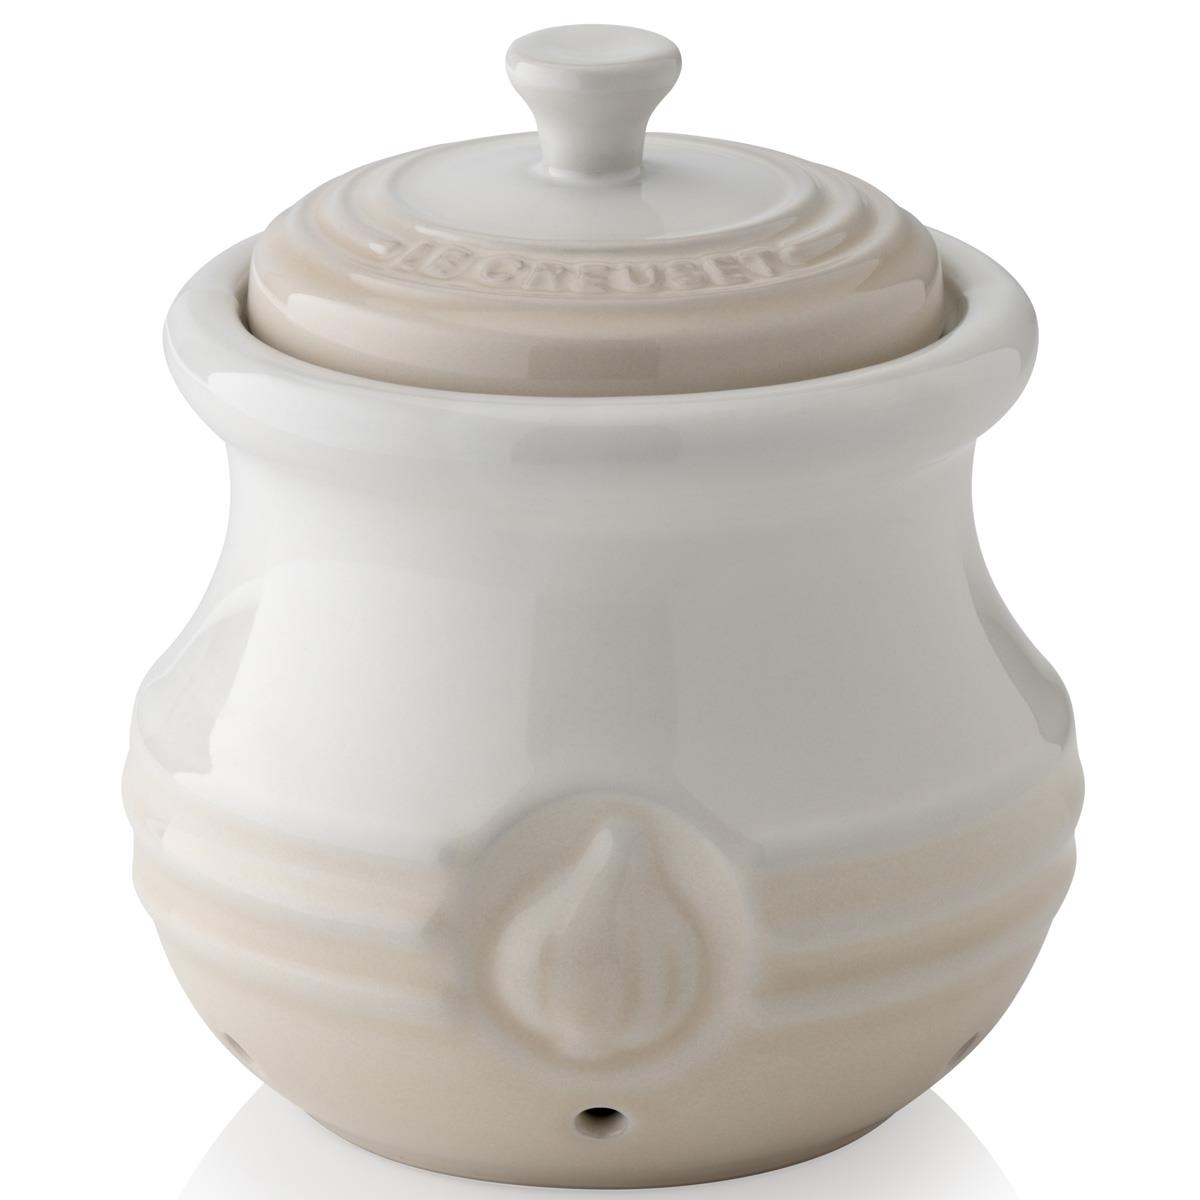 What purpose does the Le Creuset garlic keeper serve?